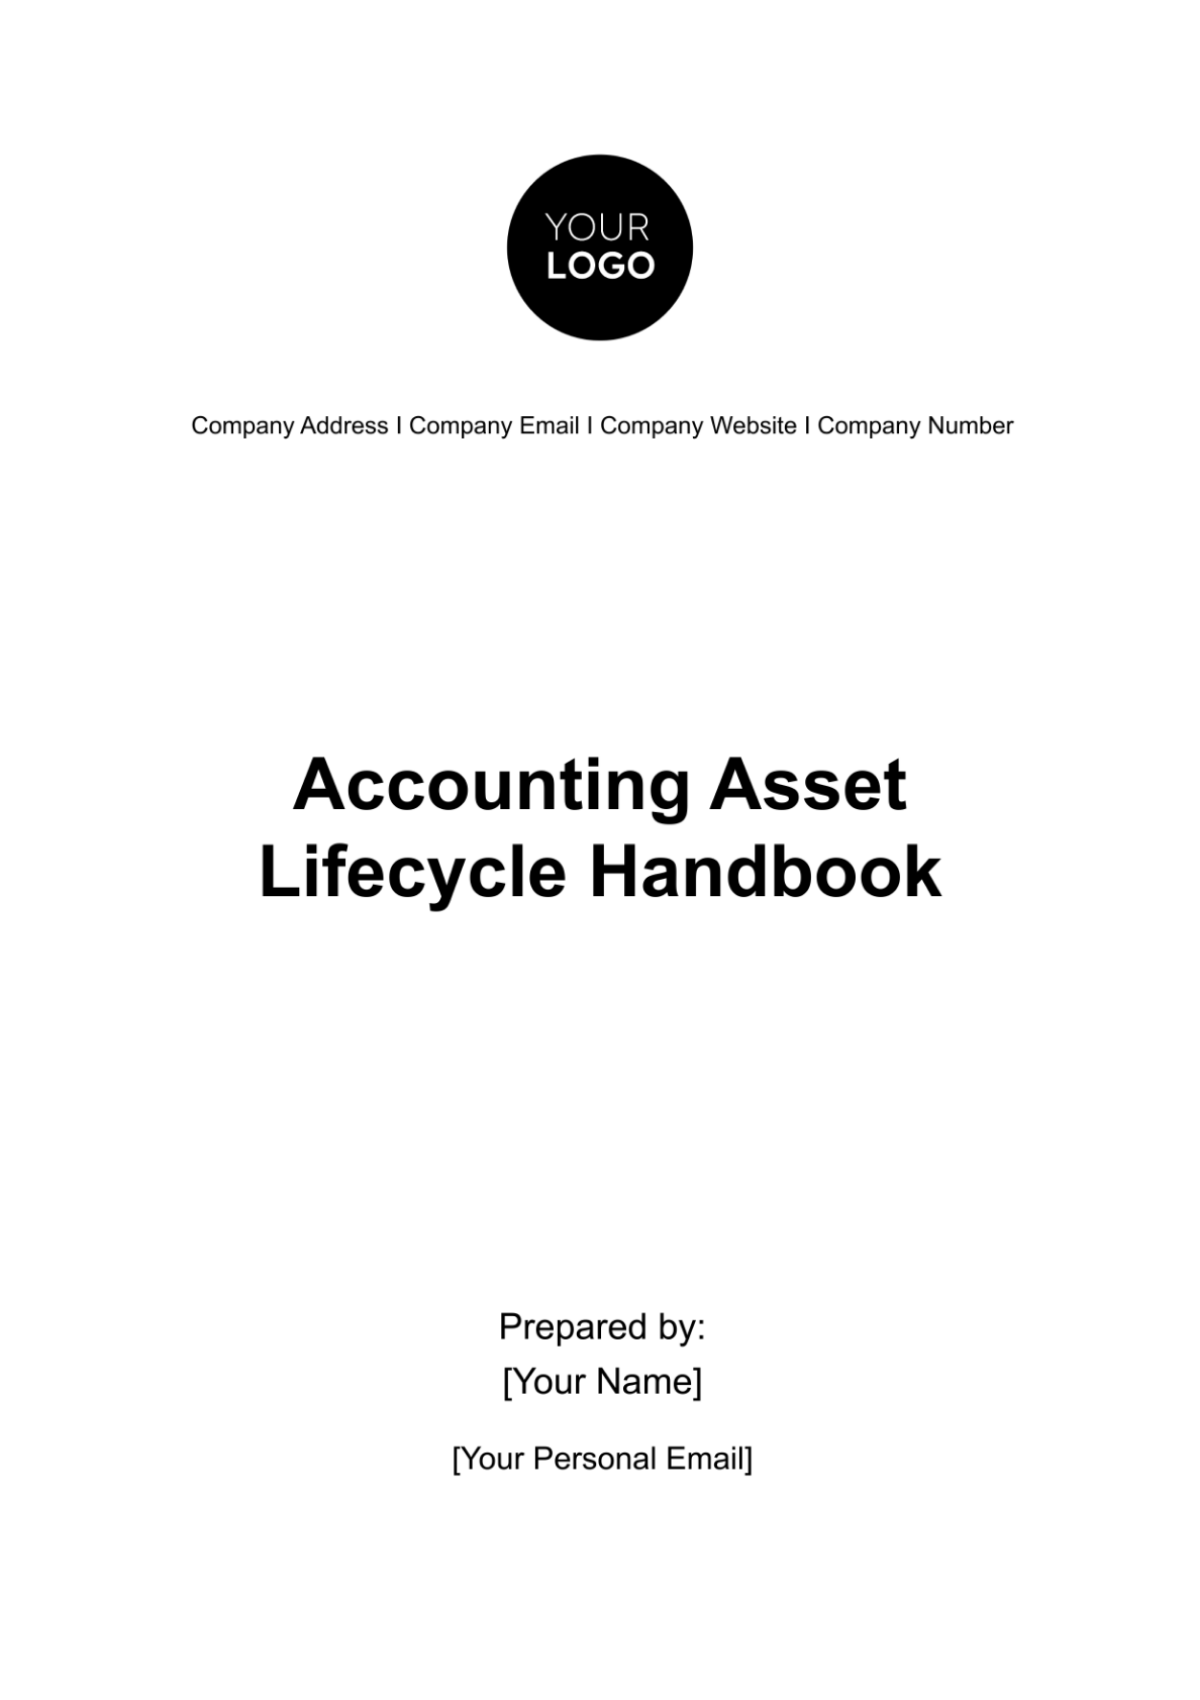 Accounting Asset Lifecycle Handbook Template